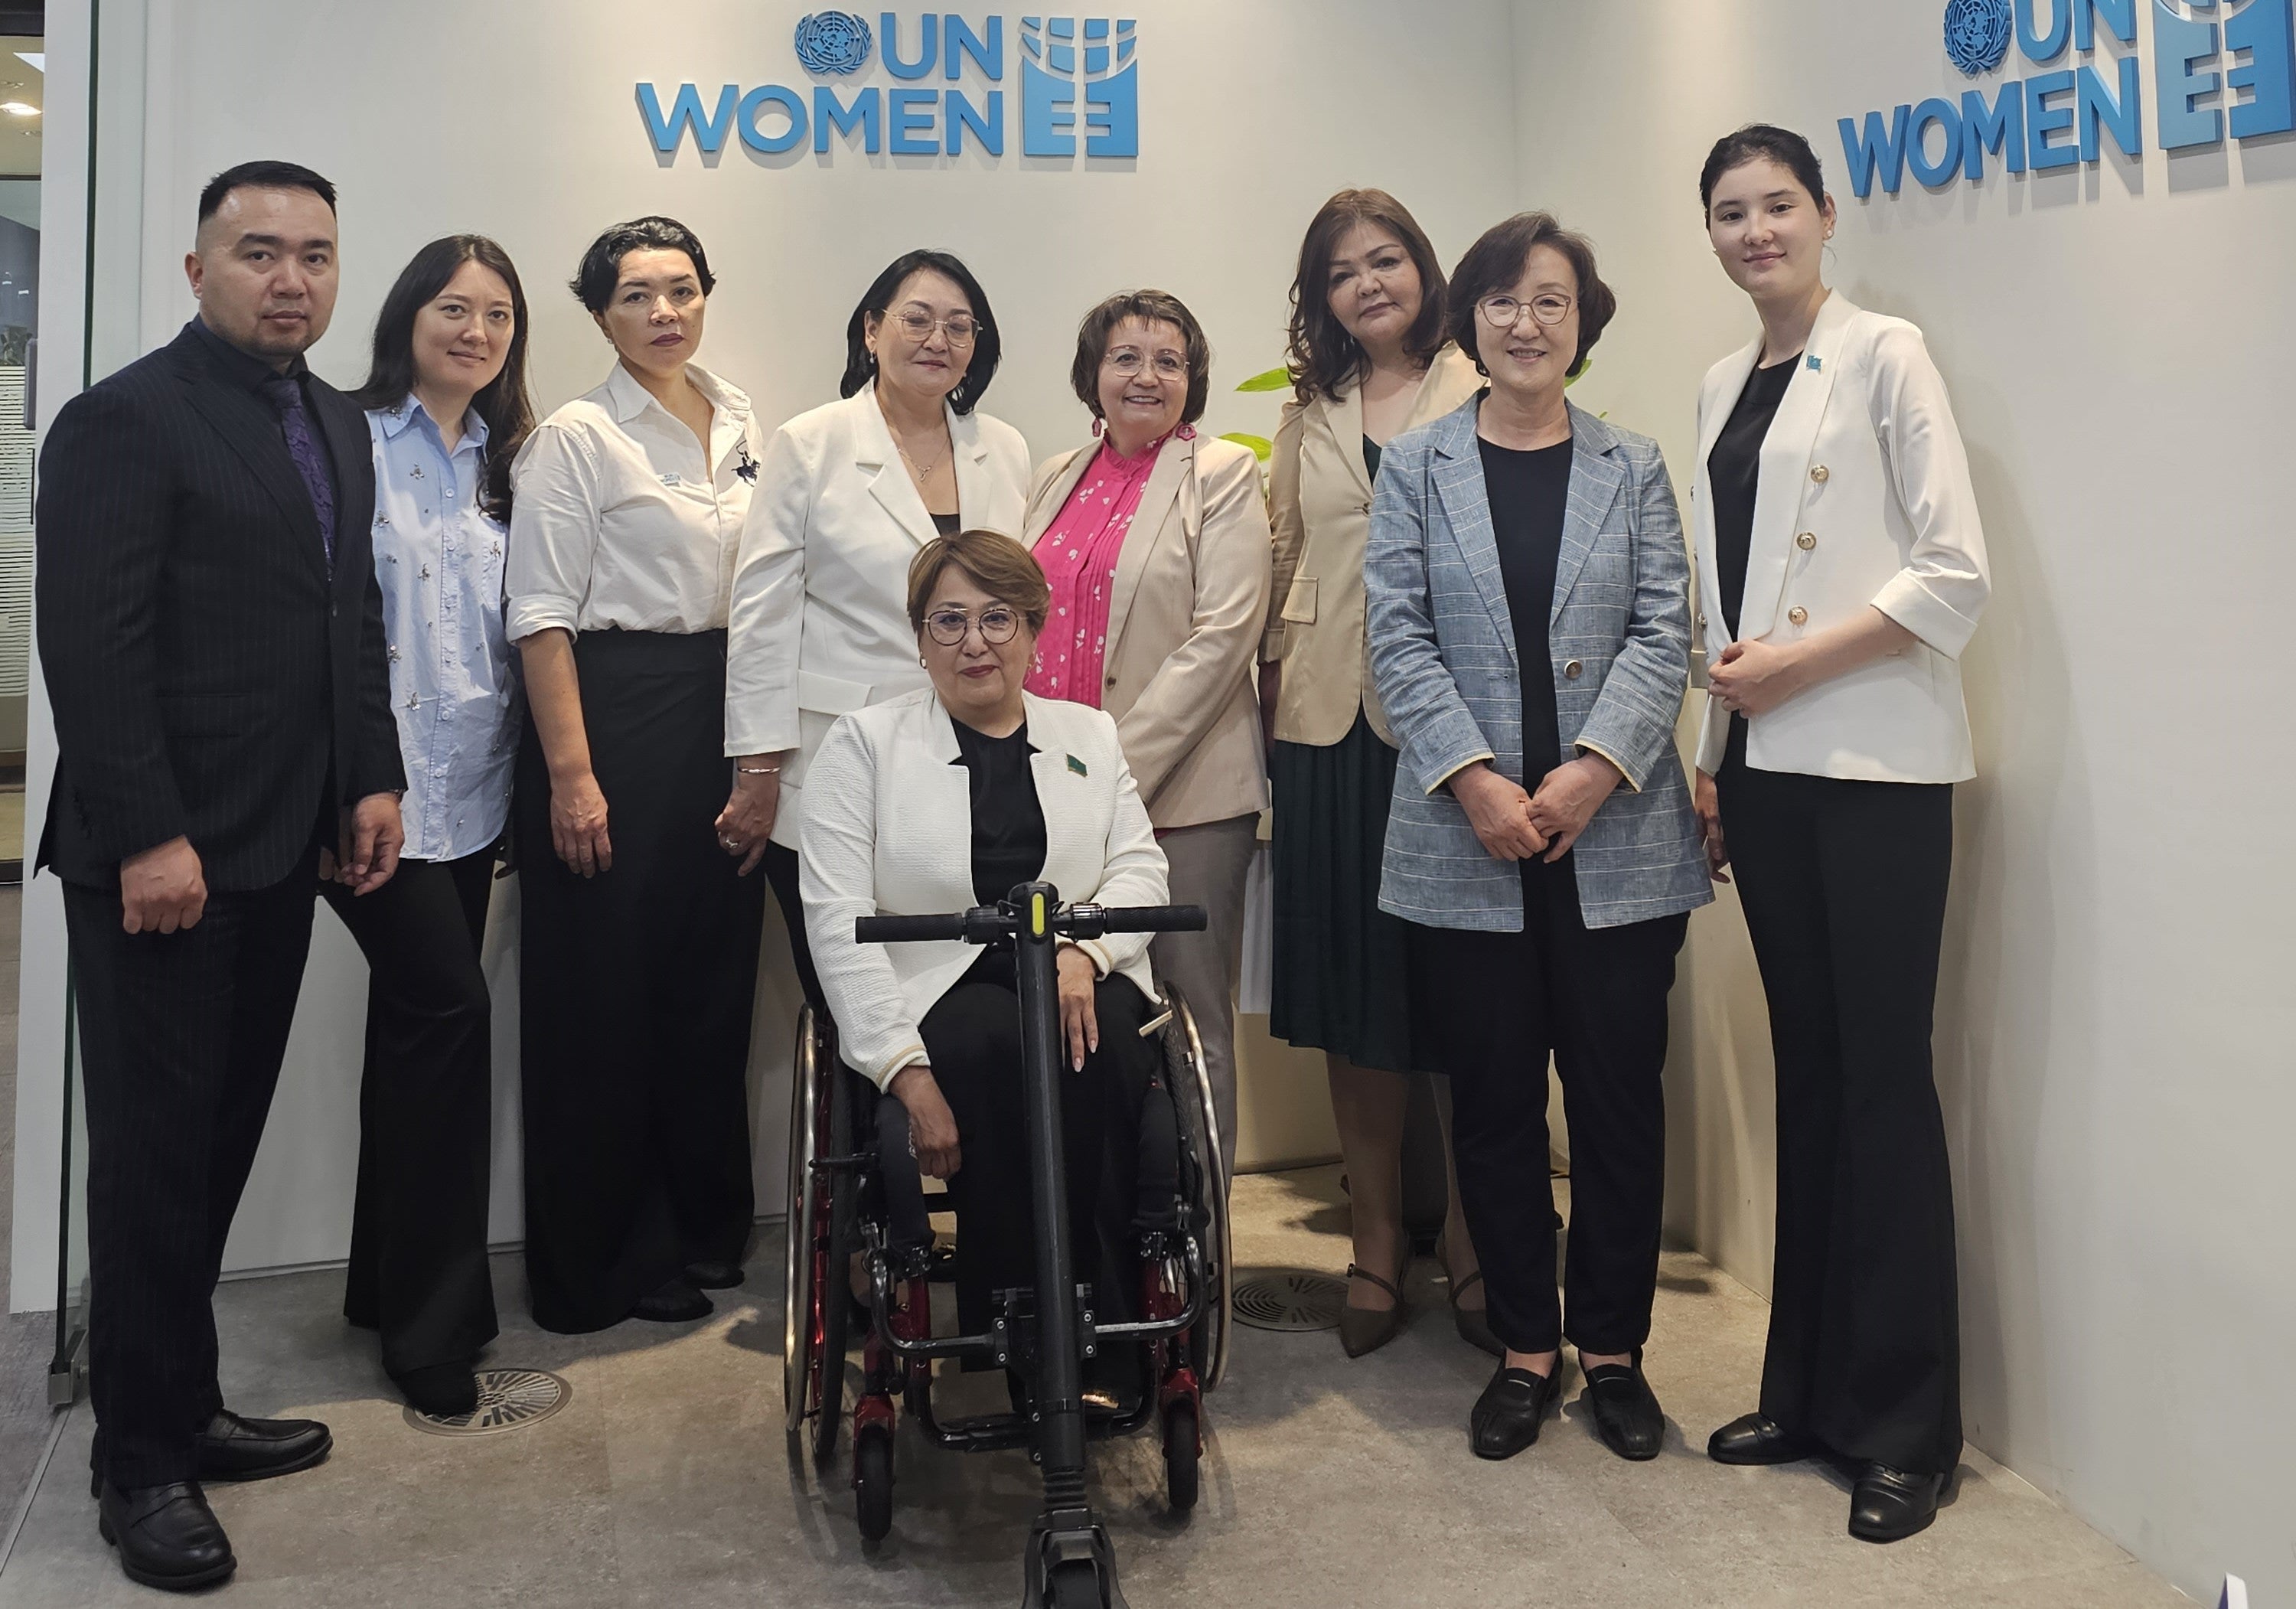 Kazakhstan’s national delegation led by Ms. Lyazzat Kaltayeva, Senator, member of the National Commission on Women’s Affairs and Family and Demographic Policy under the President. Photo: UN Women Kazakhstan 